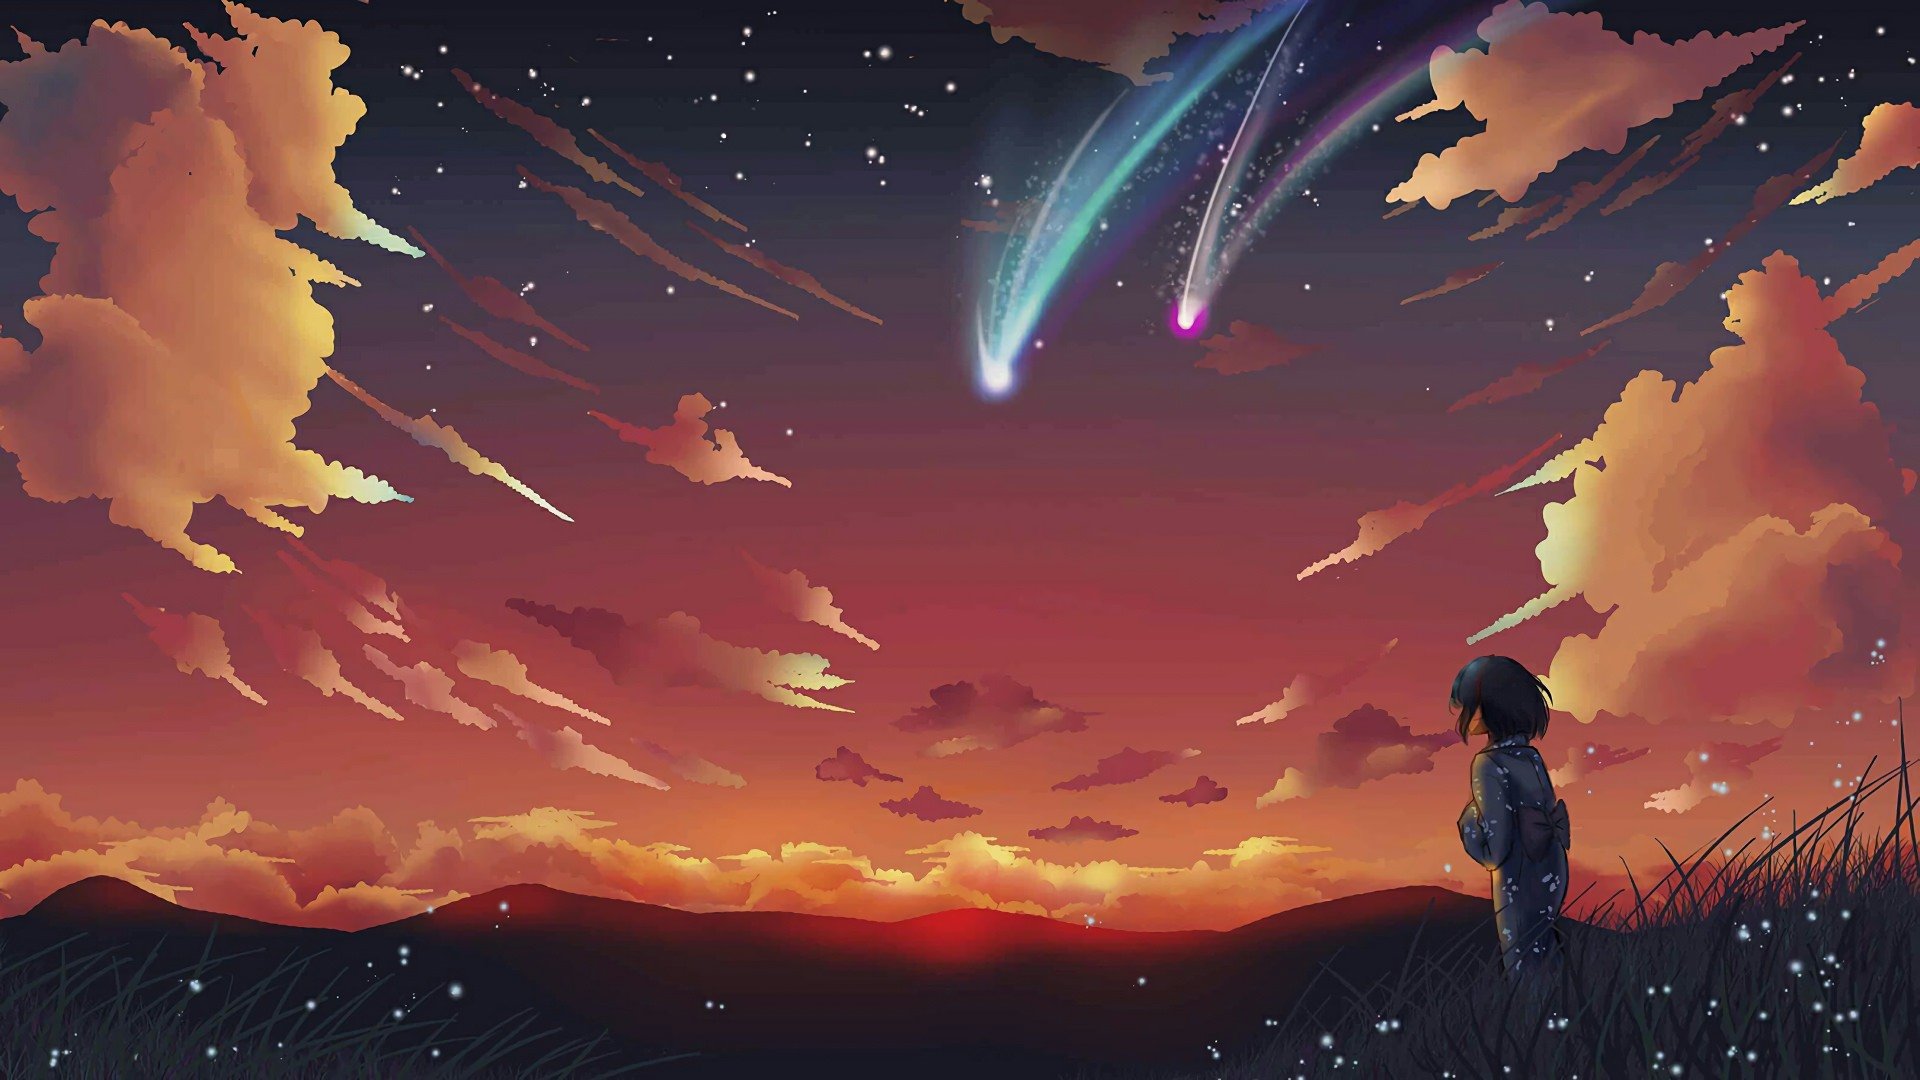 Your Name Anime Landscape Wallpaper Free Your Name Anime Landscape Background